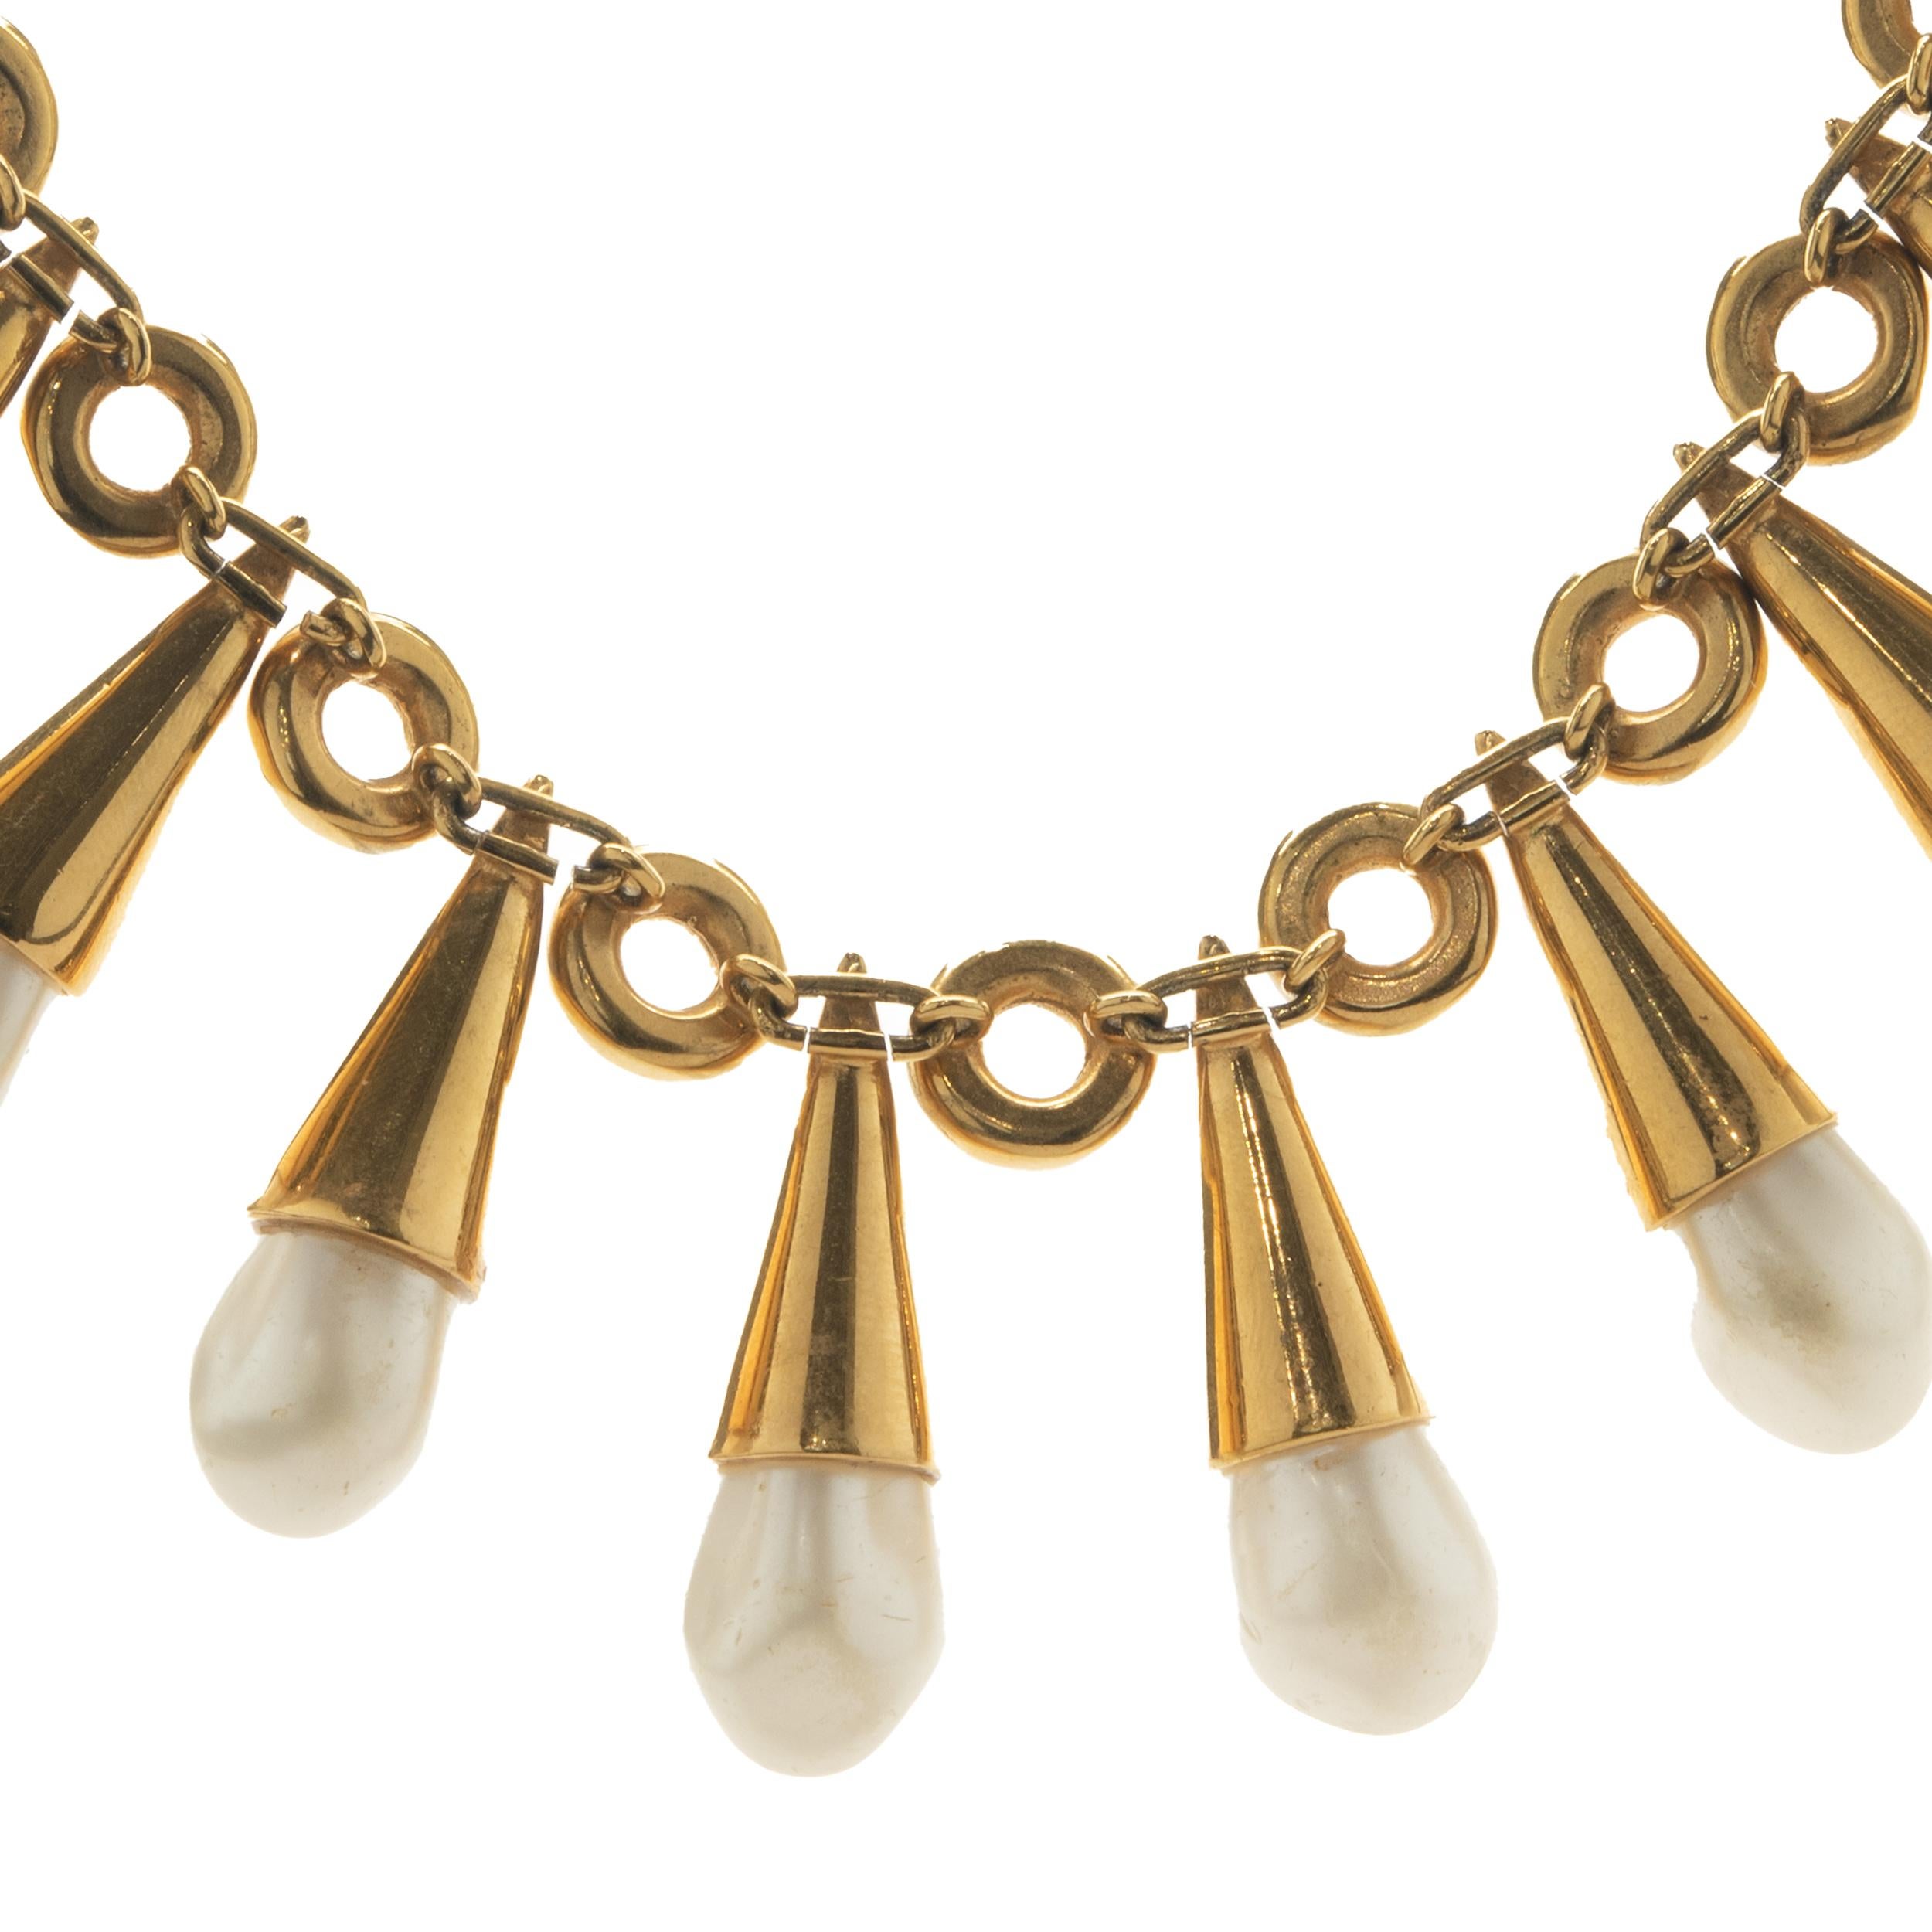 Designer: Chanel
Material: pearl
Weight: 293.18 grams
Dimensions:  necklace measures 24-inches long
